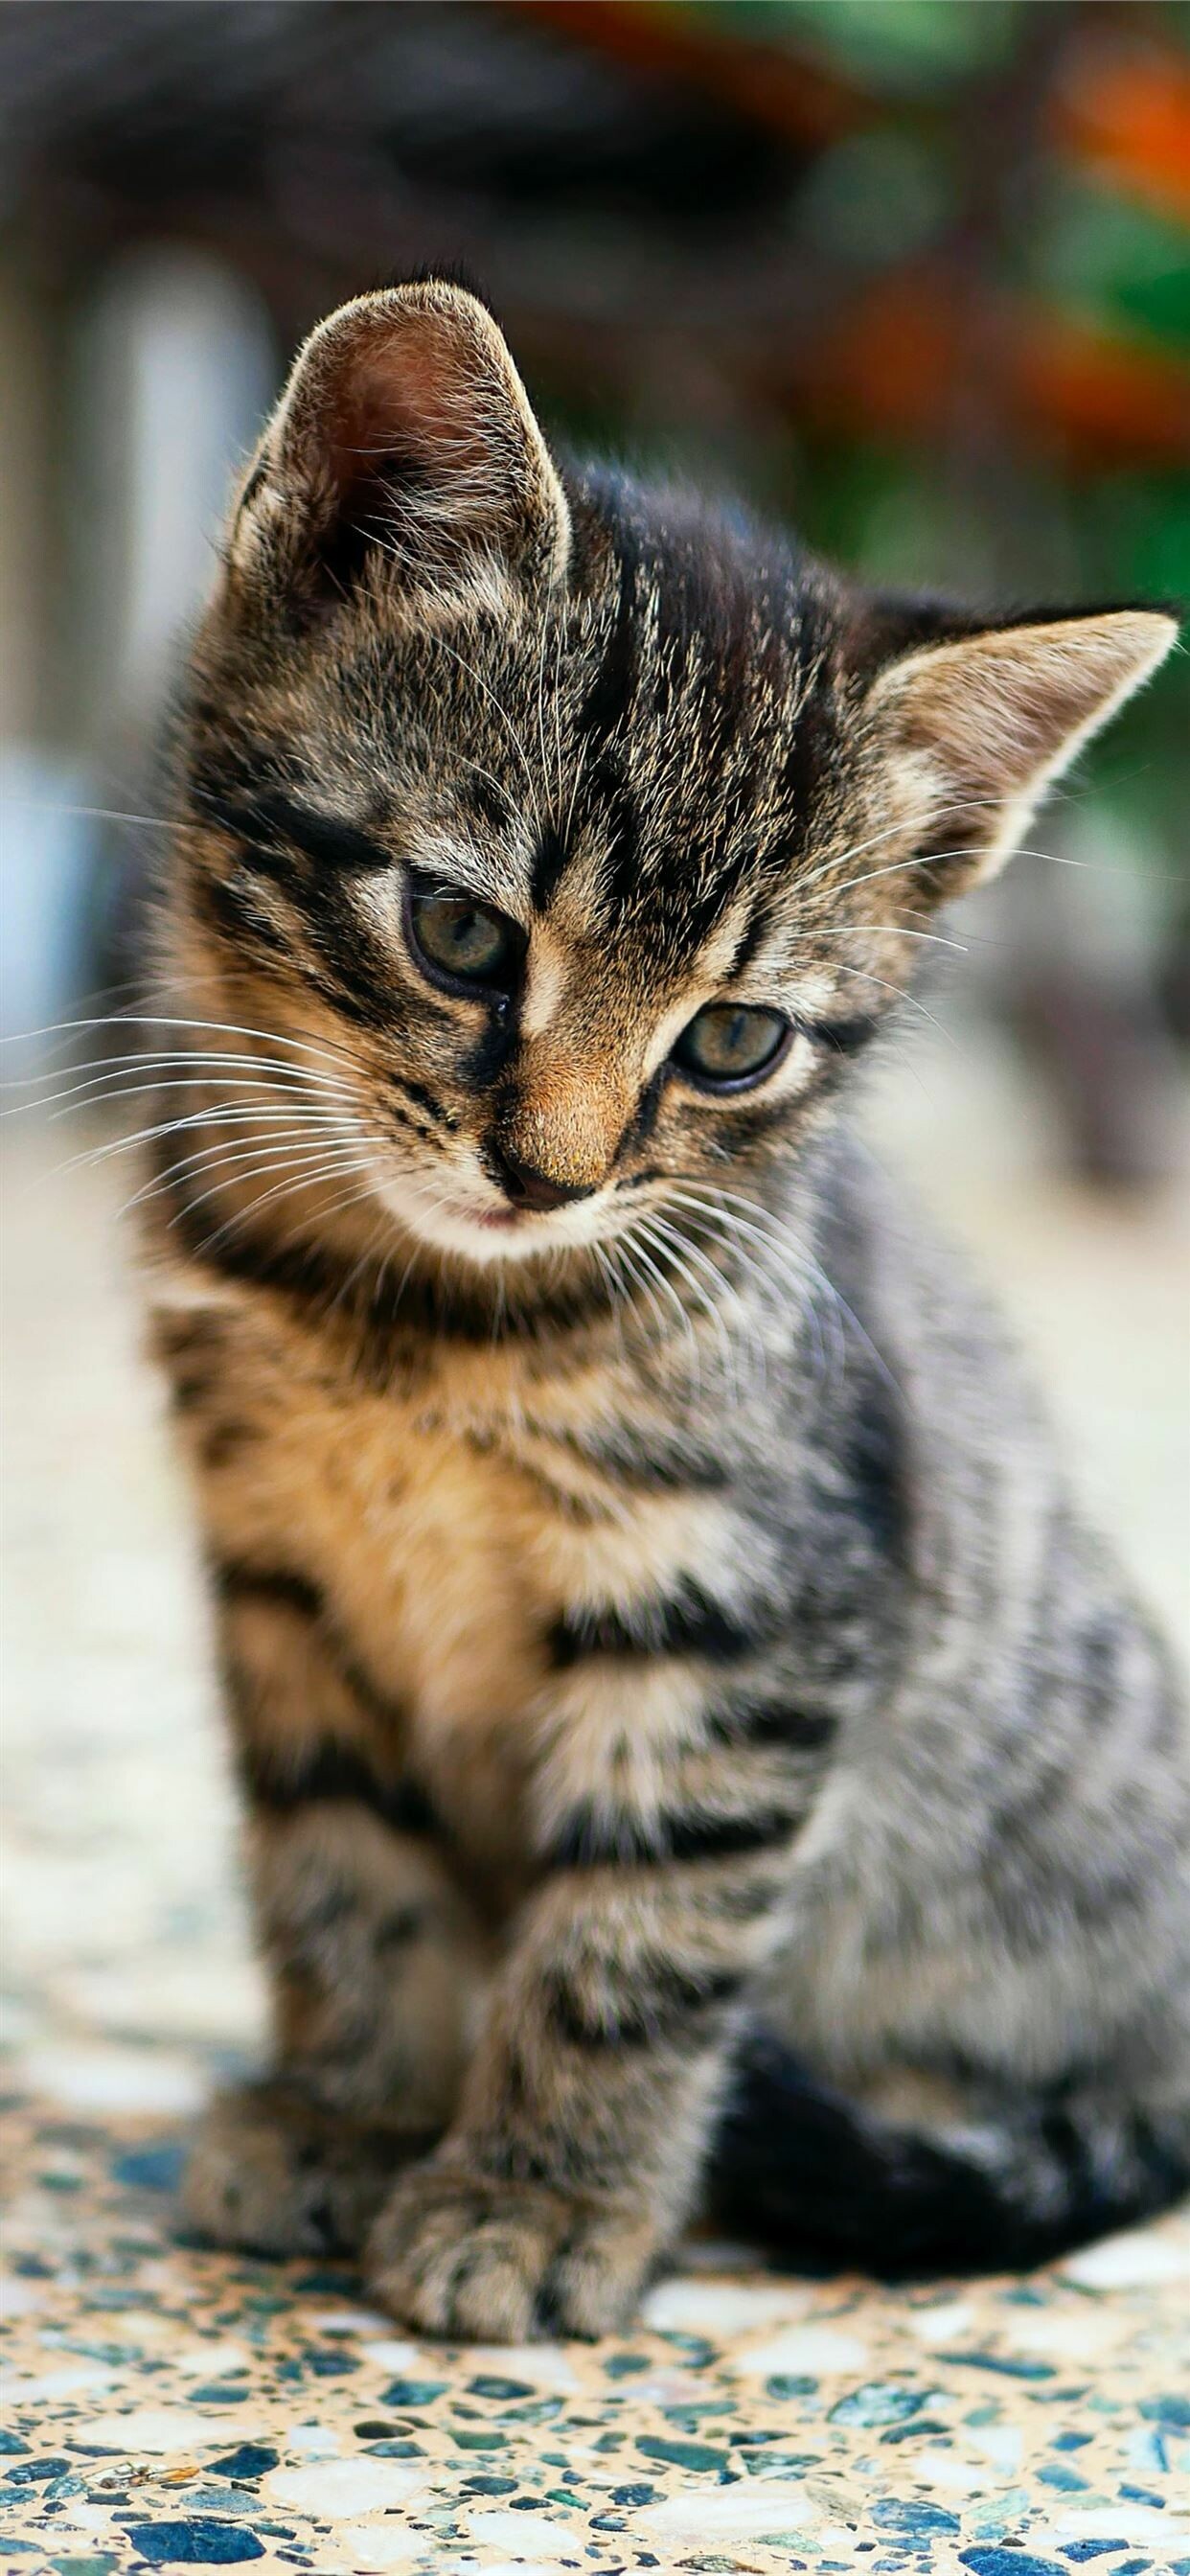 Kitten: A tabby, Domestic cat with a distinctive 'M'-shaped marking on its forehead. 1250x2690 HD Background.